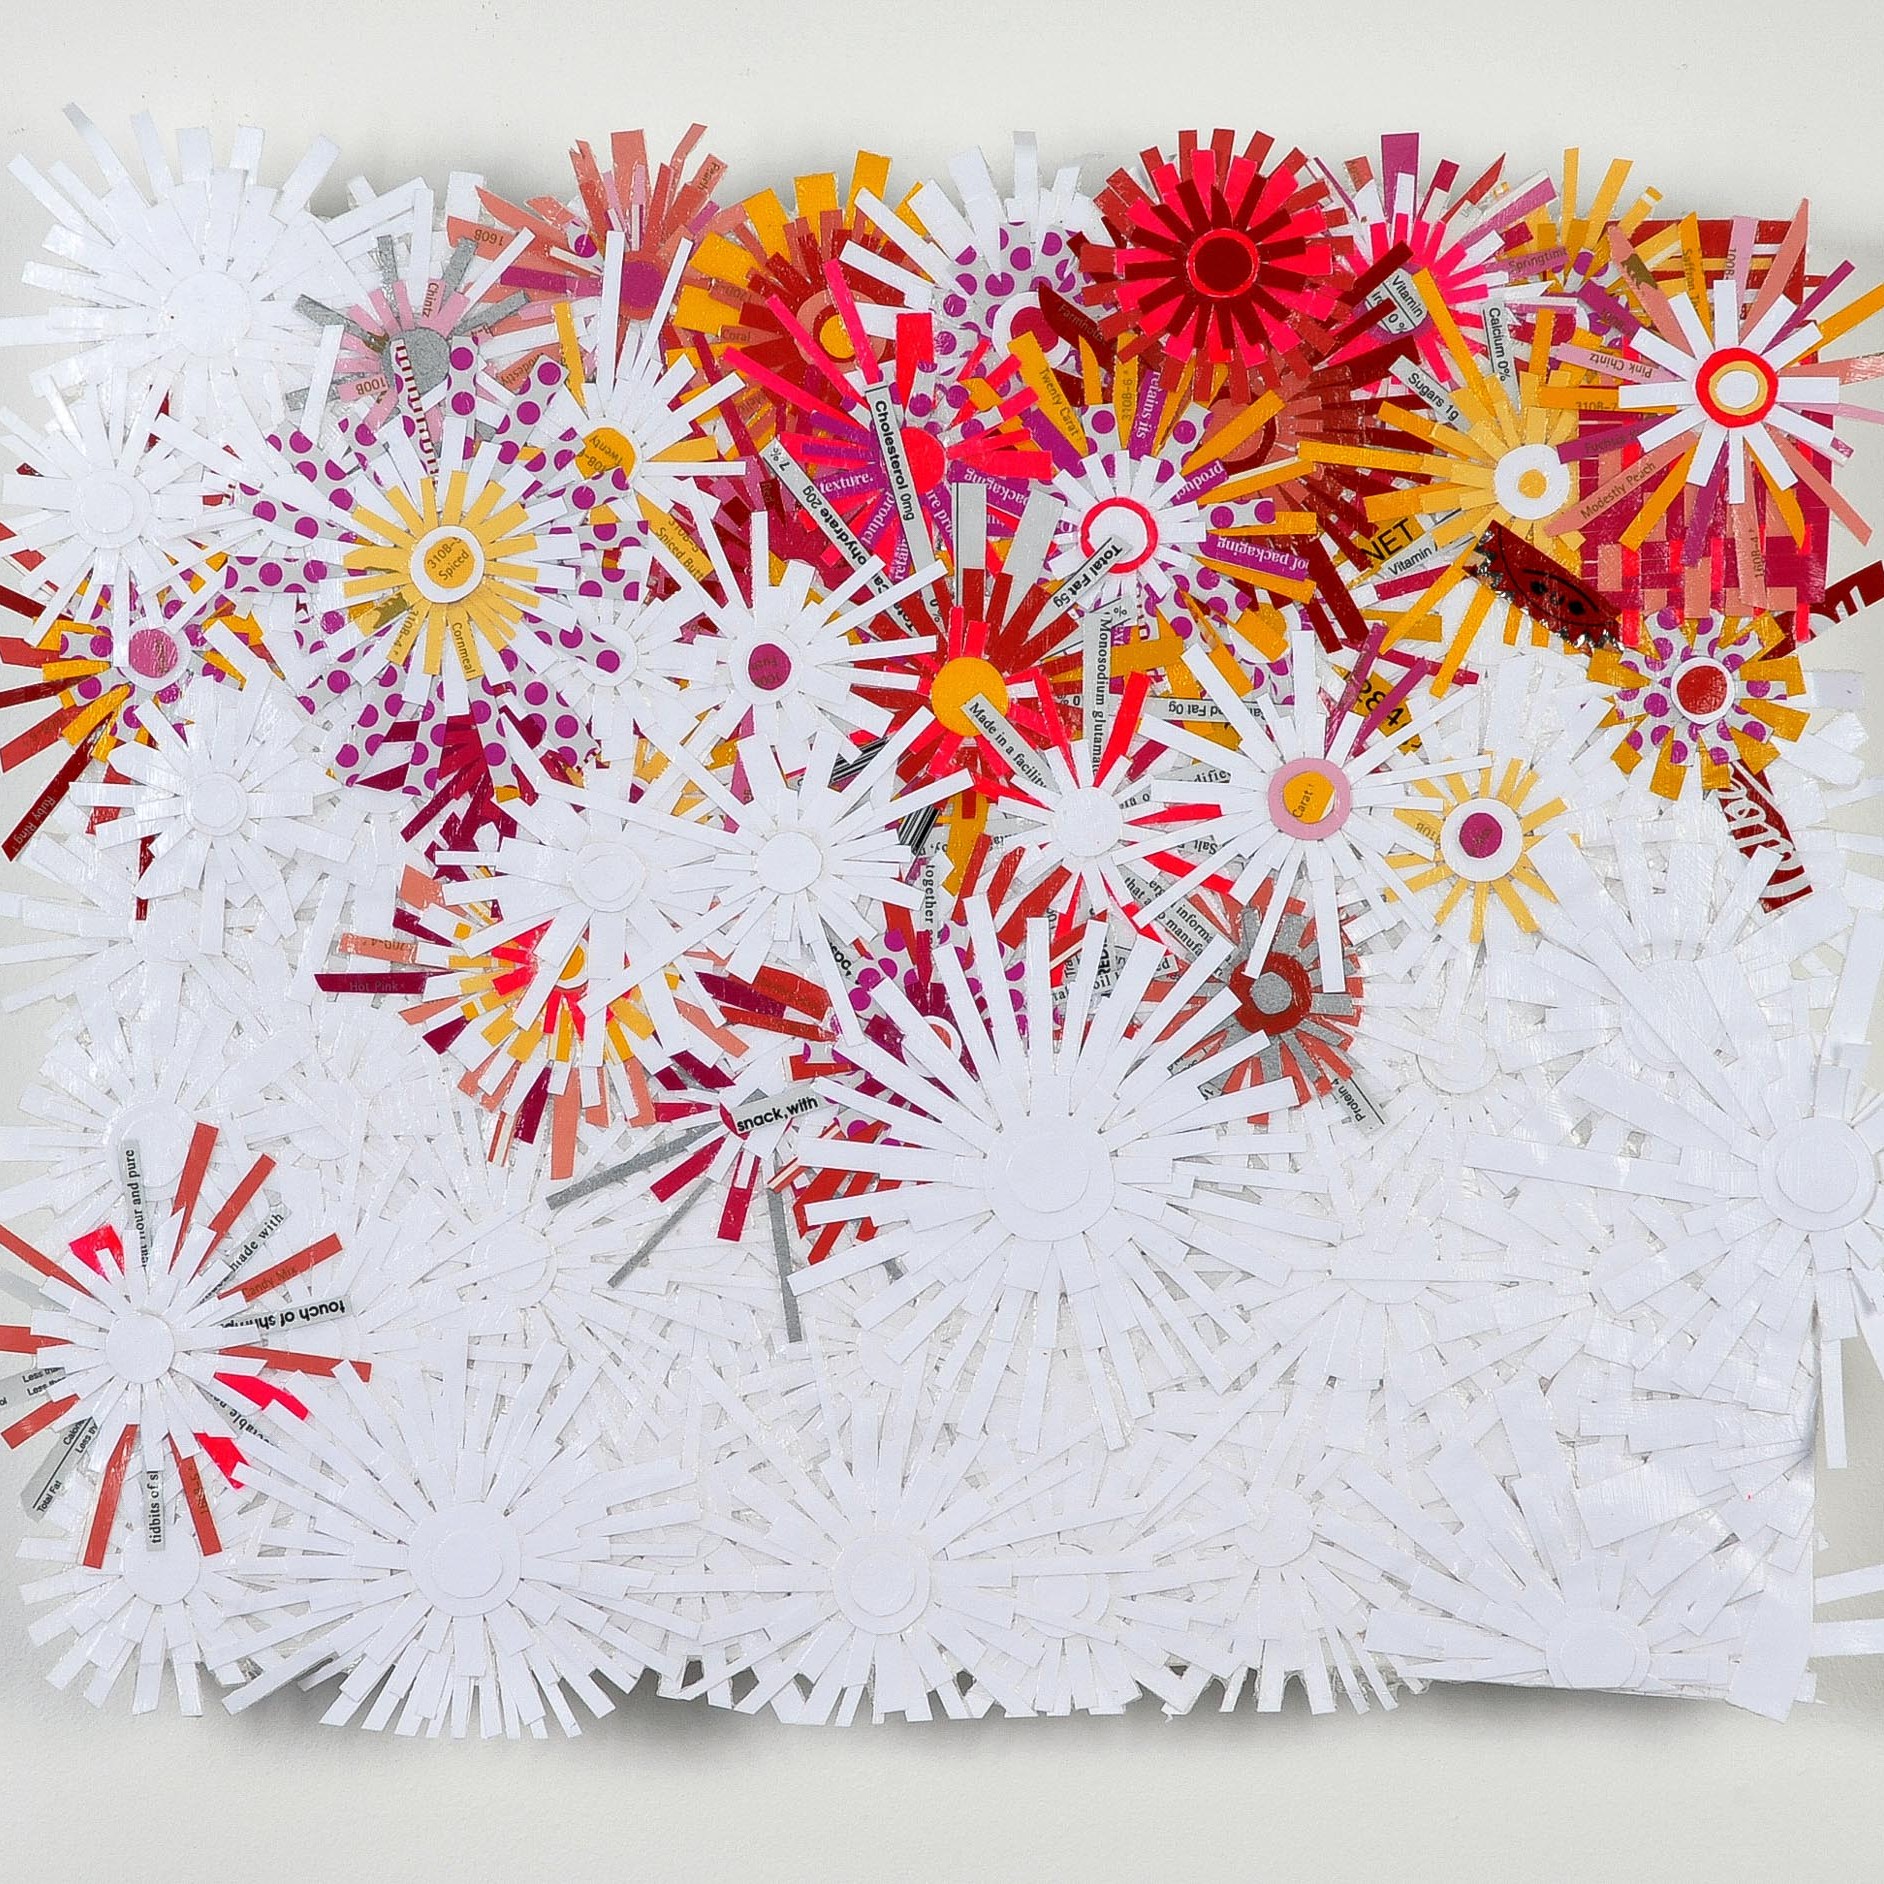 Fluourescences - 2009 | Found paper, plastic, and acrylic on wood | 14 x 17 in | Private Collection, Washington, D.C.